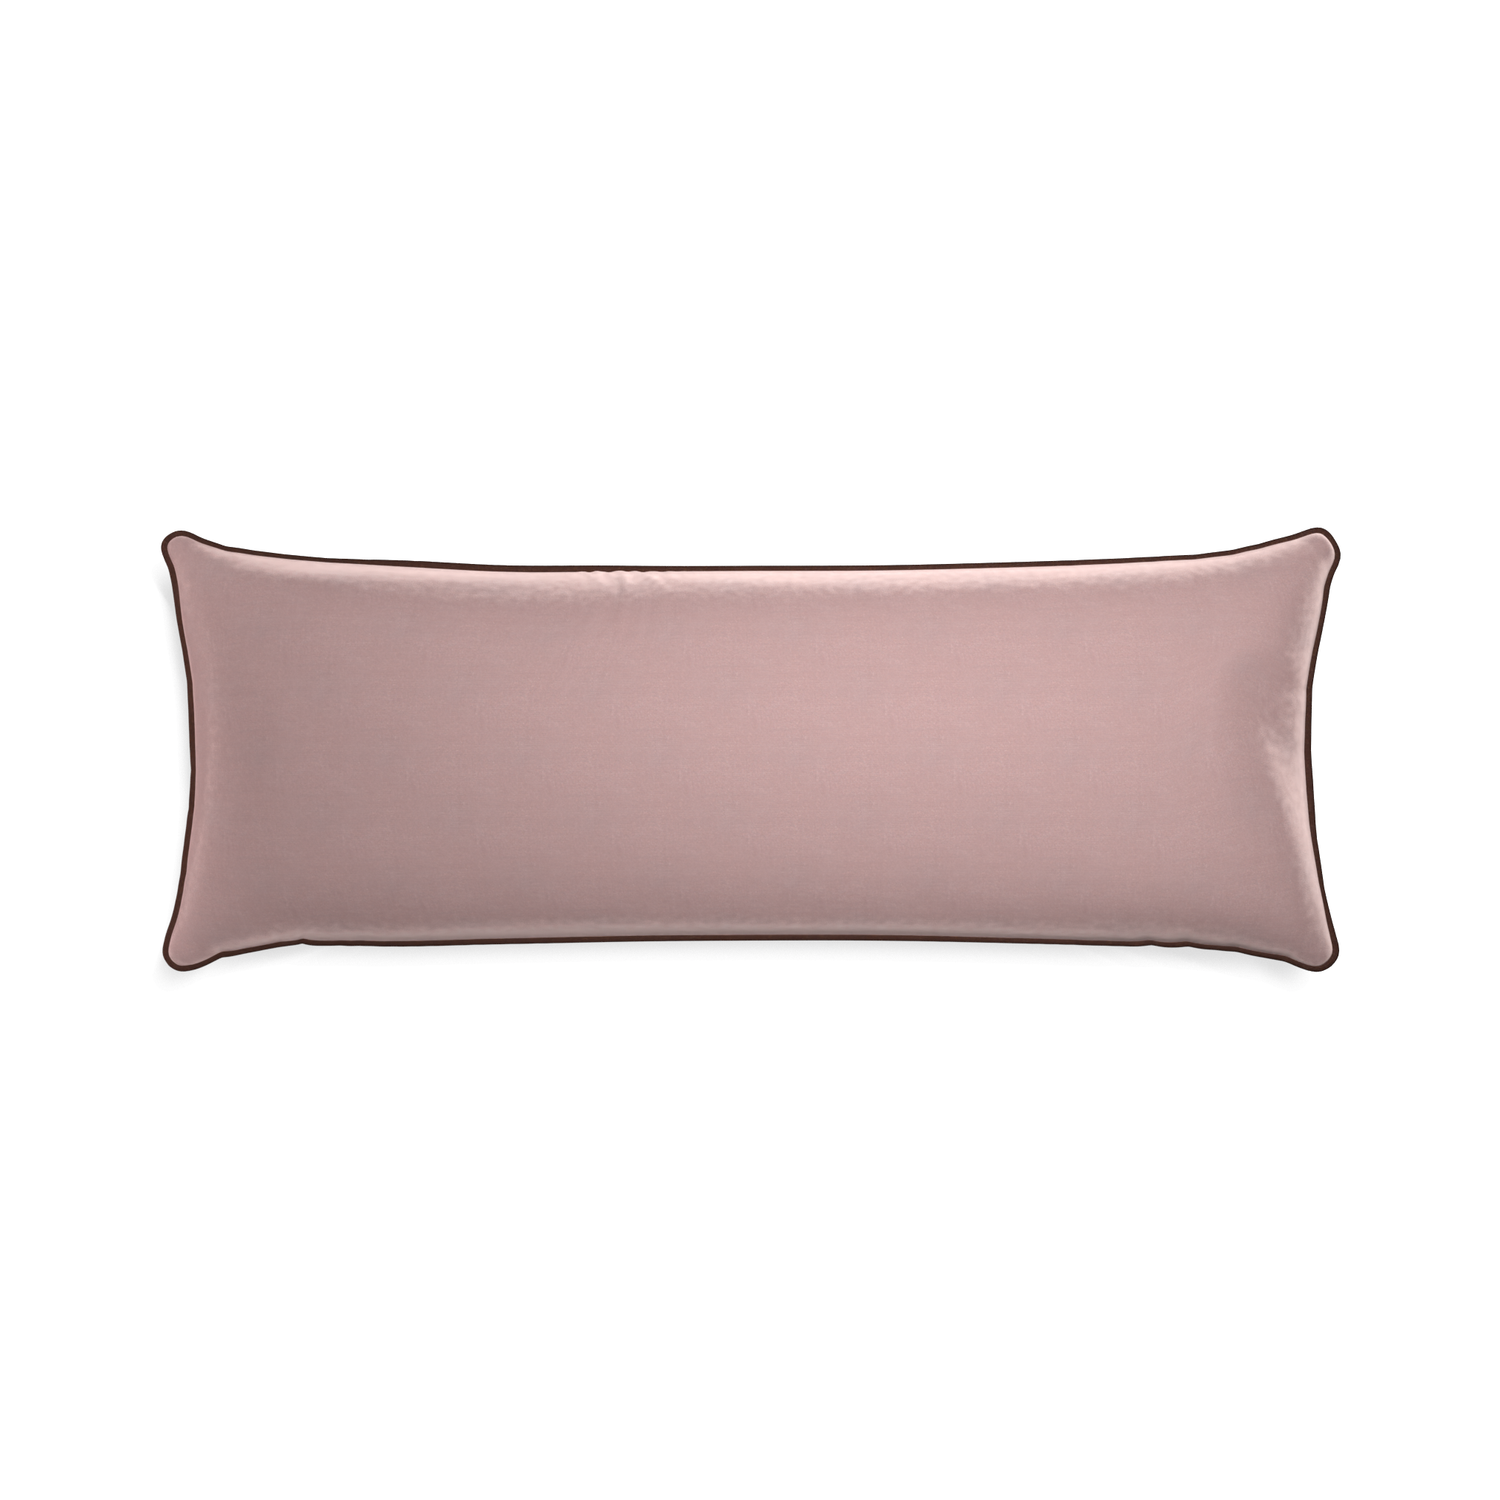 Xl-lumbar mauve velvet custom pillow with w piping on white background